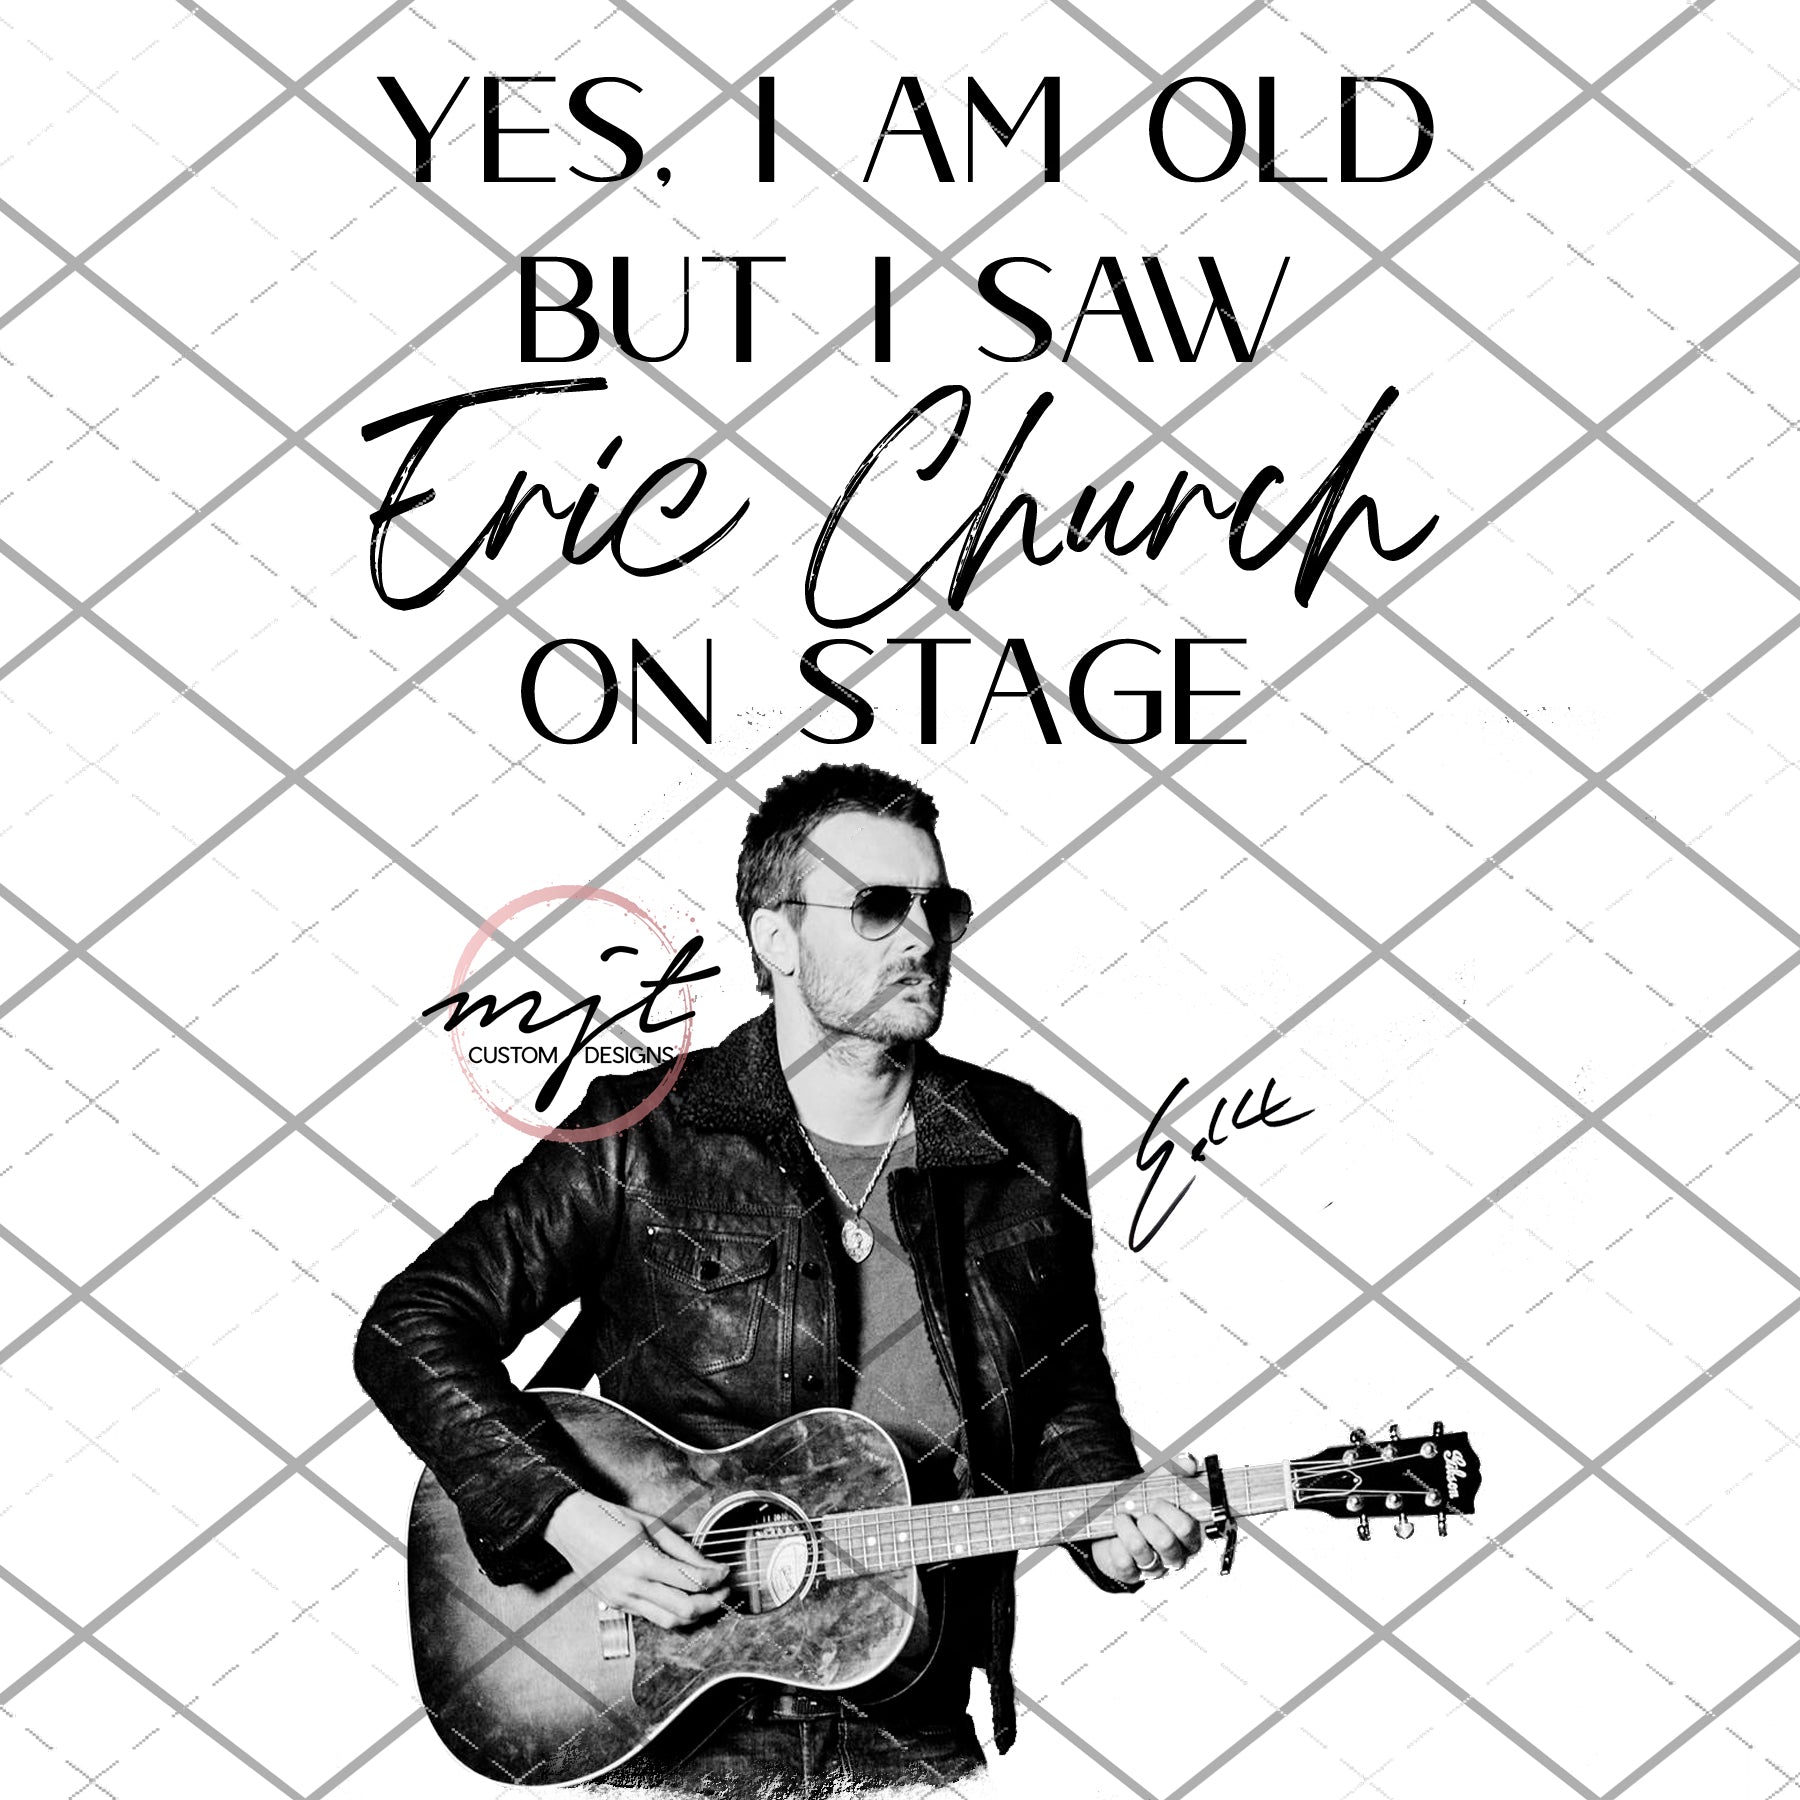 I may be old but I saw Eric Church - PNG file - download